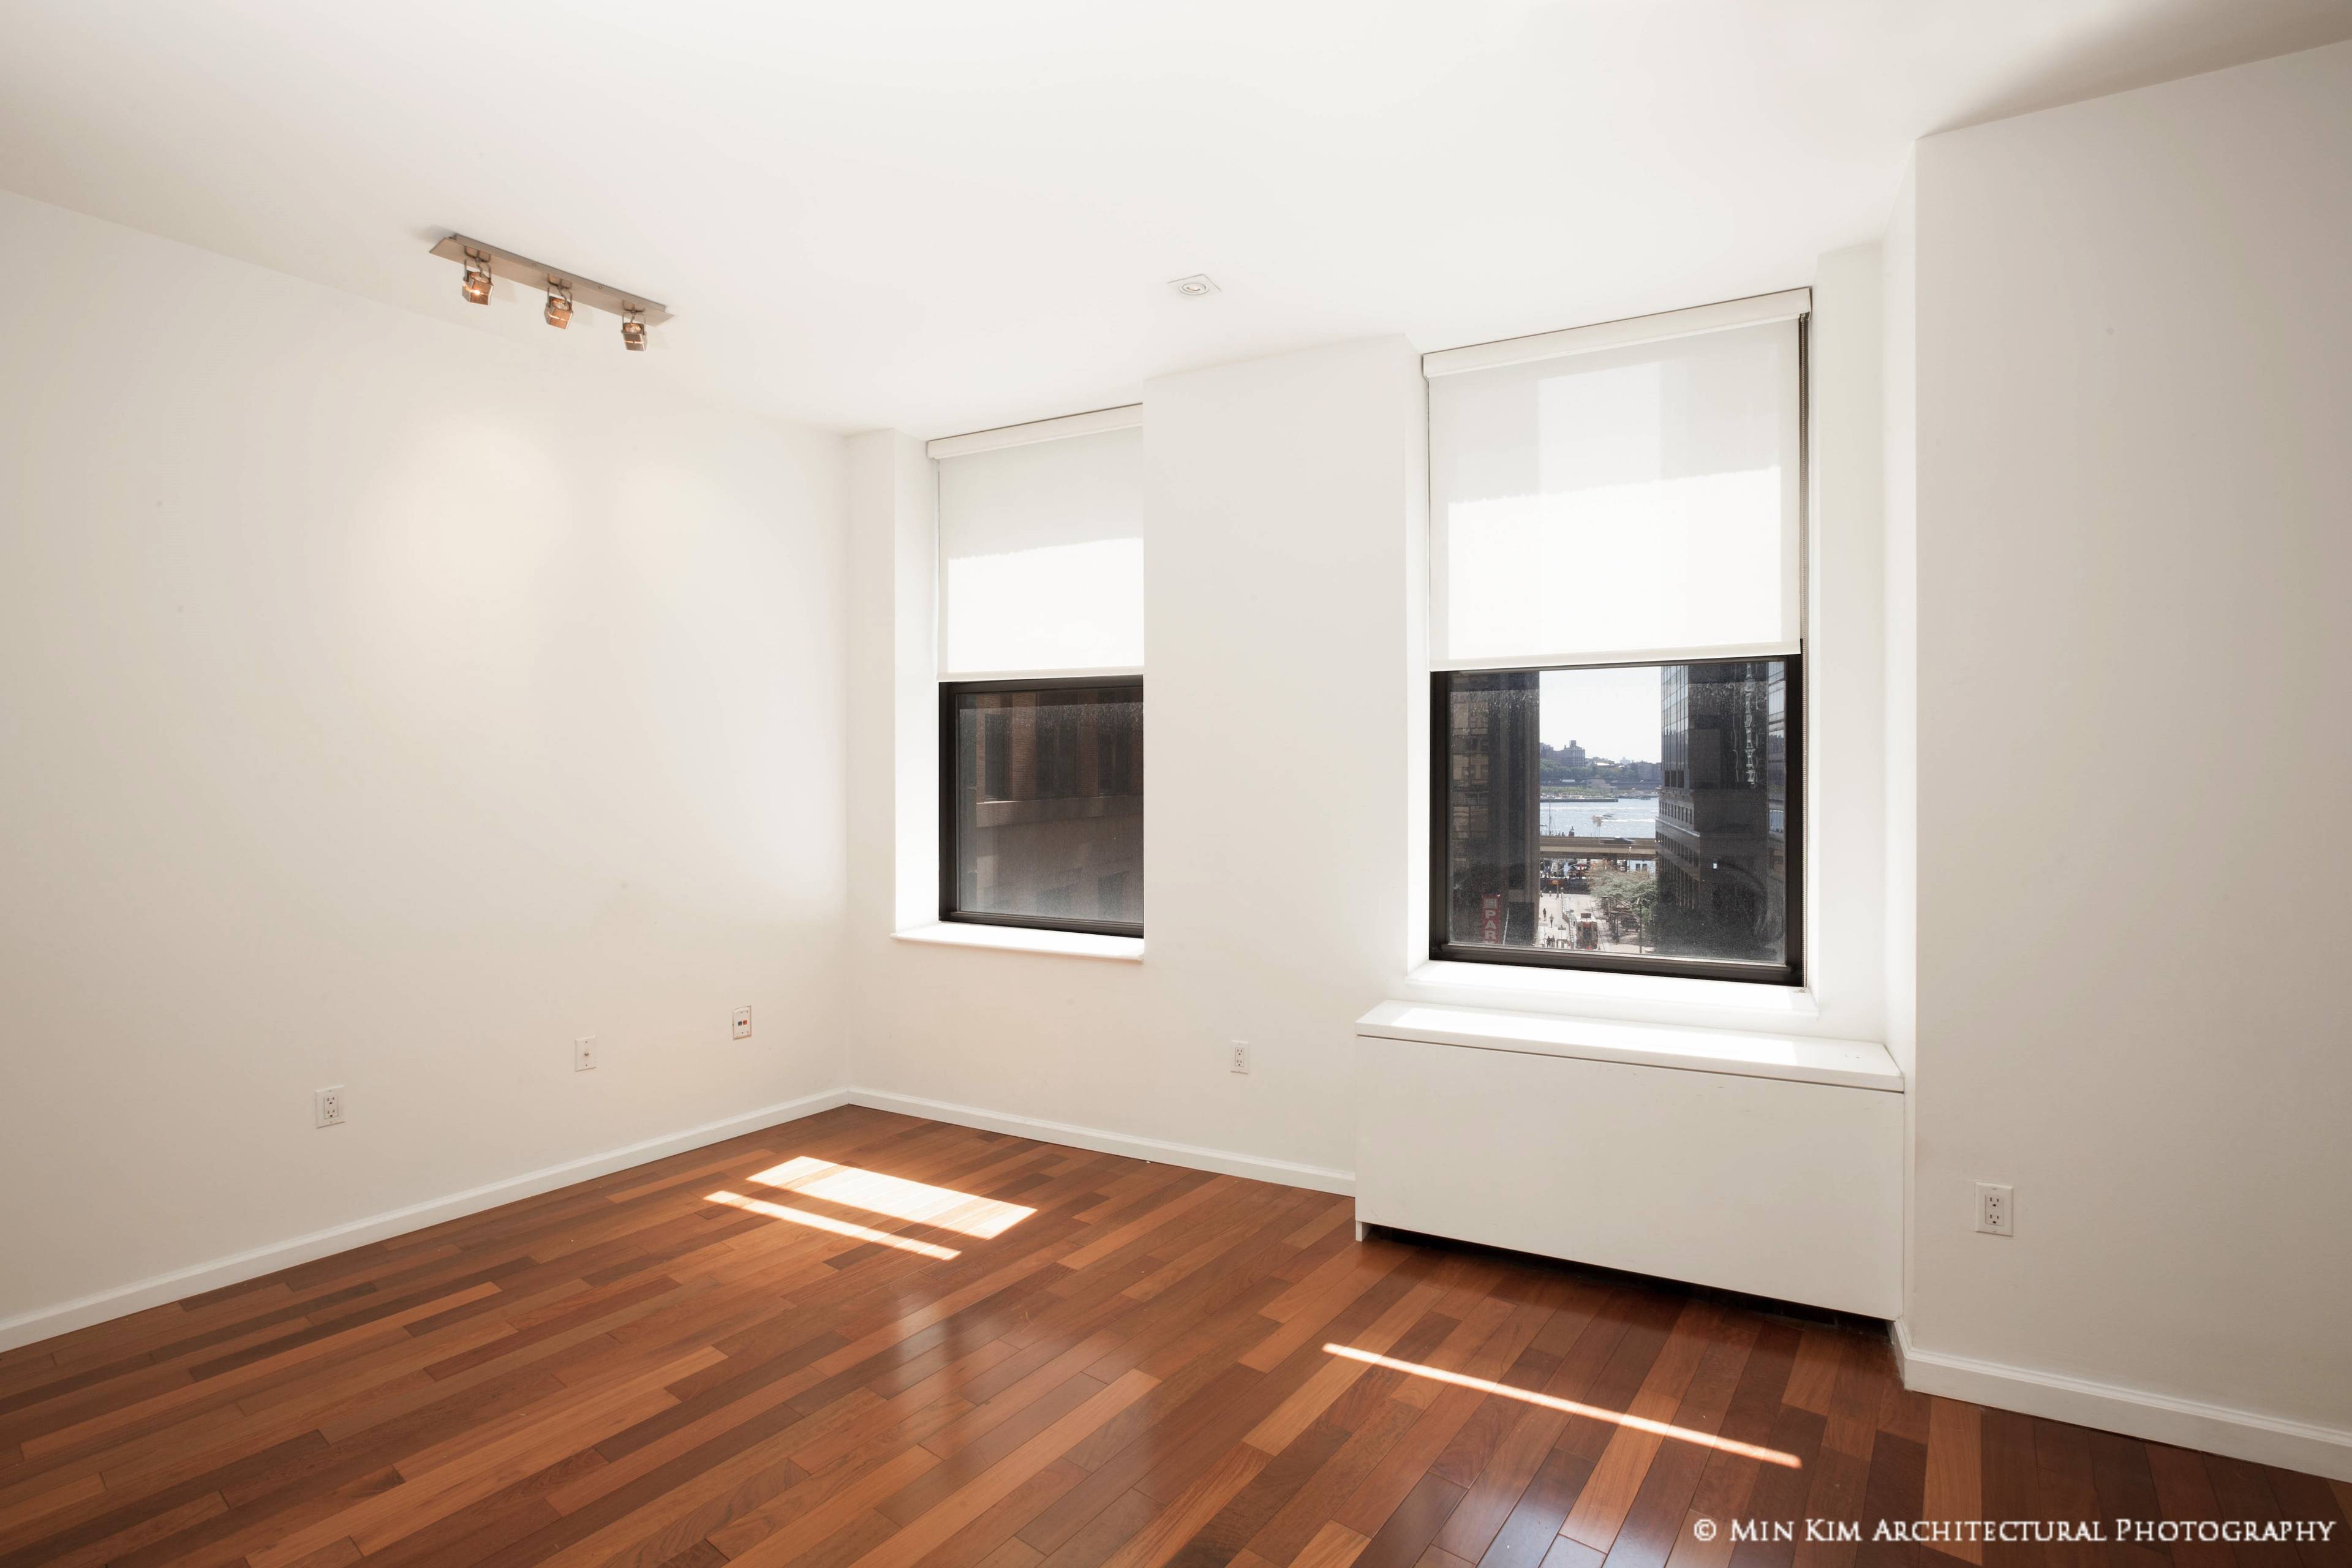 Financial District Sunny Converted Two Bedroom Two Bath Apartment for Rent with River View in Luxury Condominium Building - Formerly the Cocoa Exchange